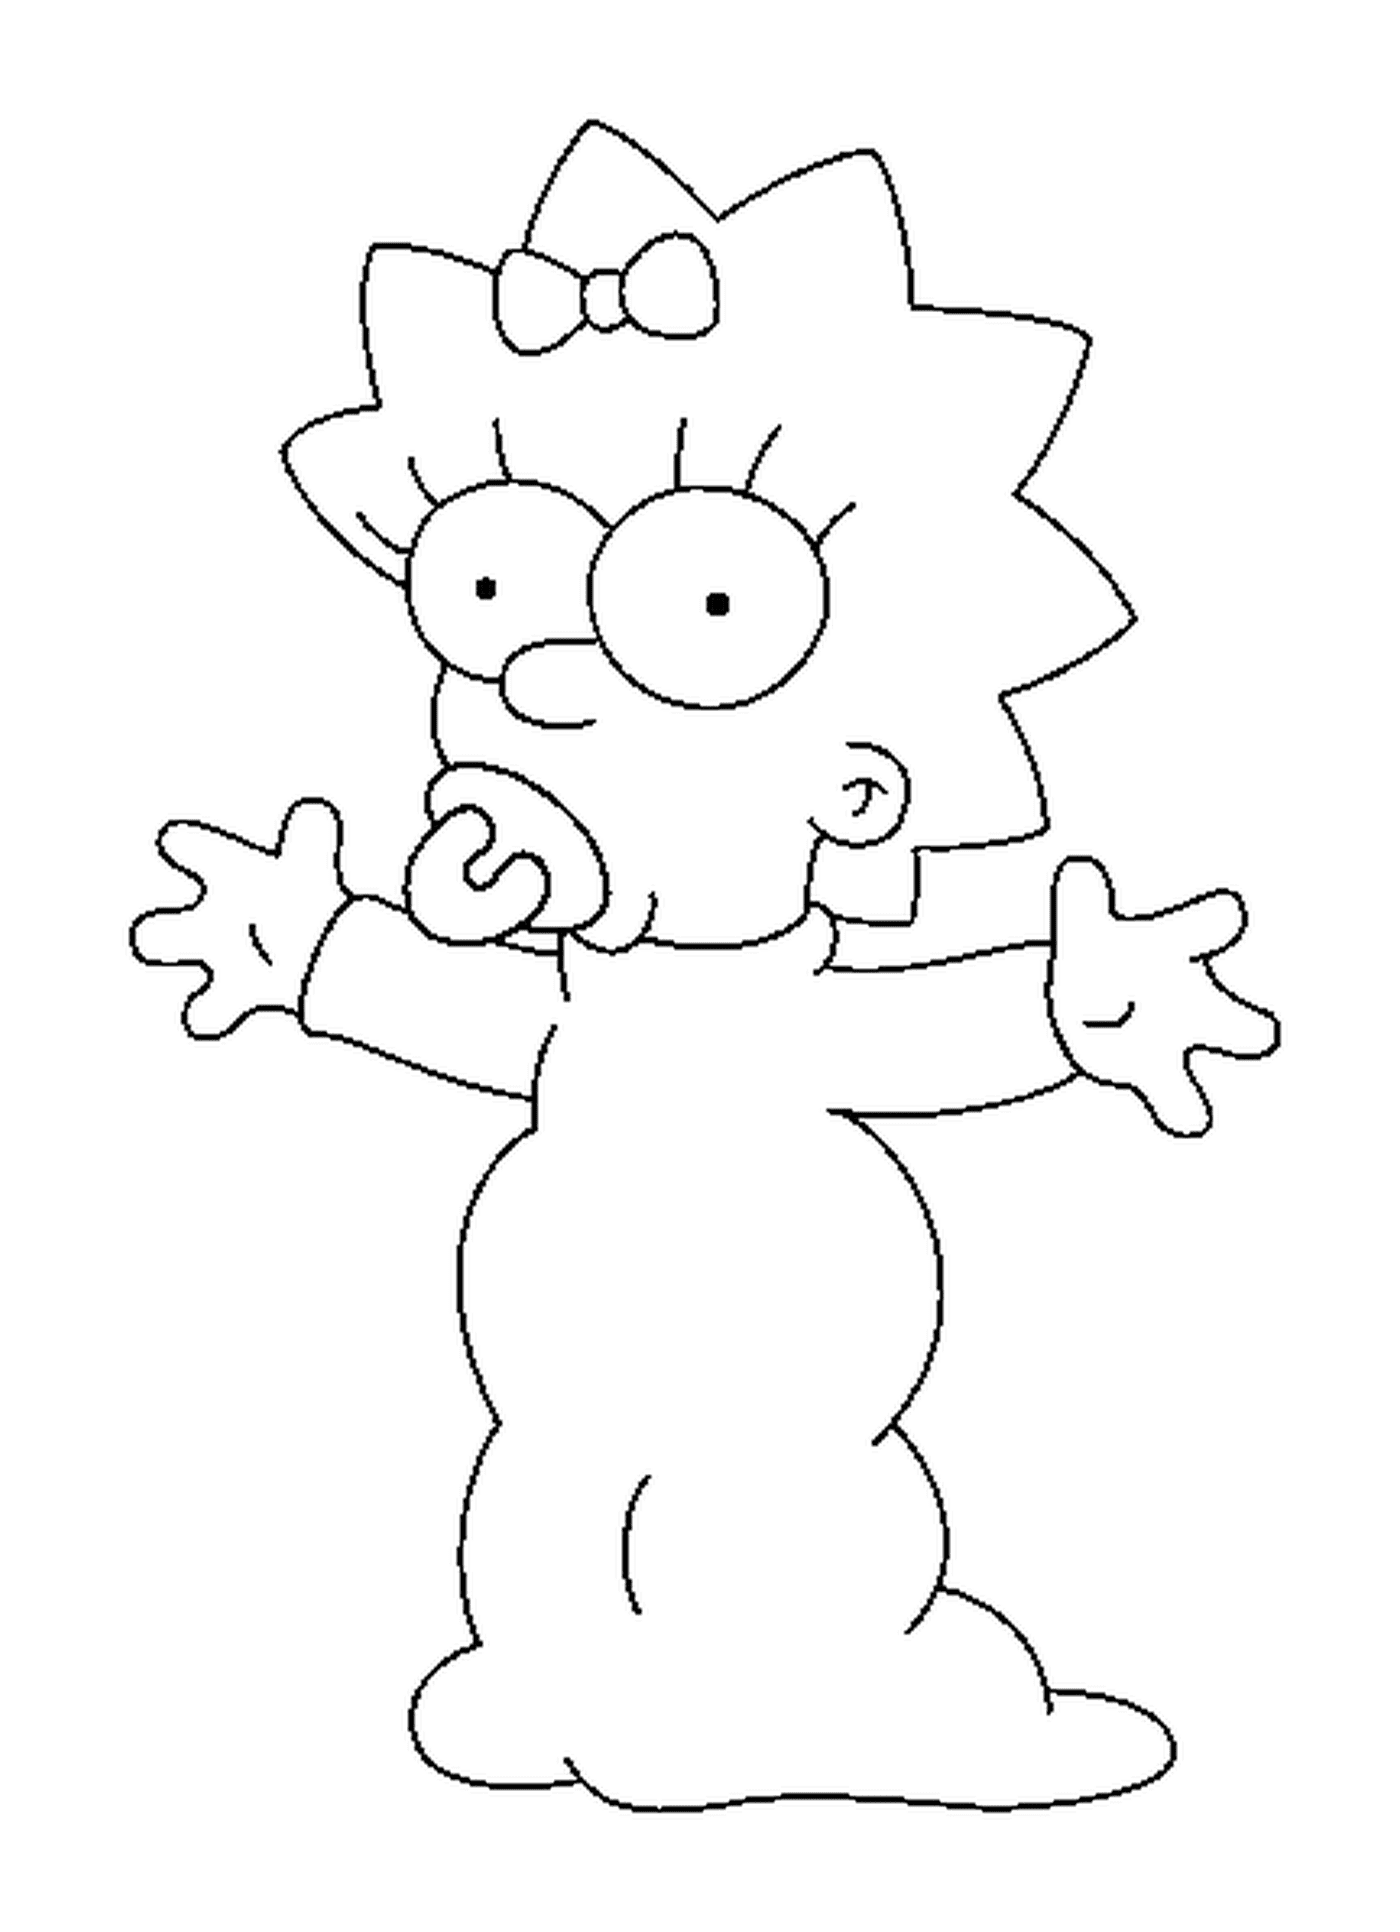  Maggie Simpson opens her arms 